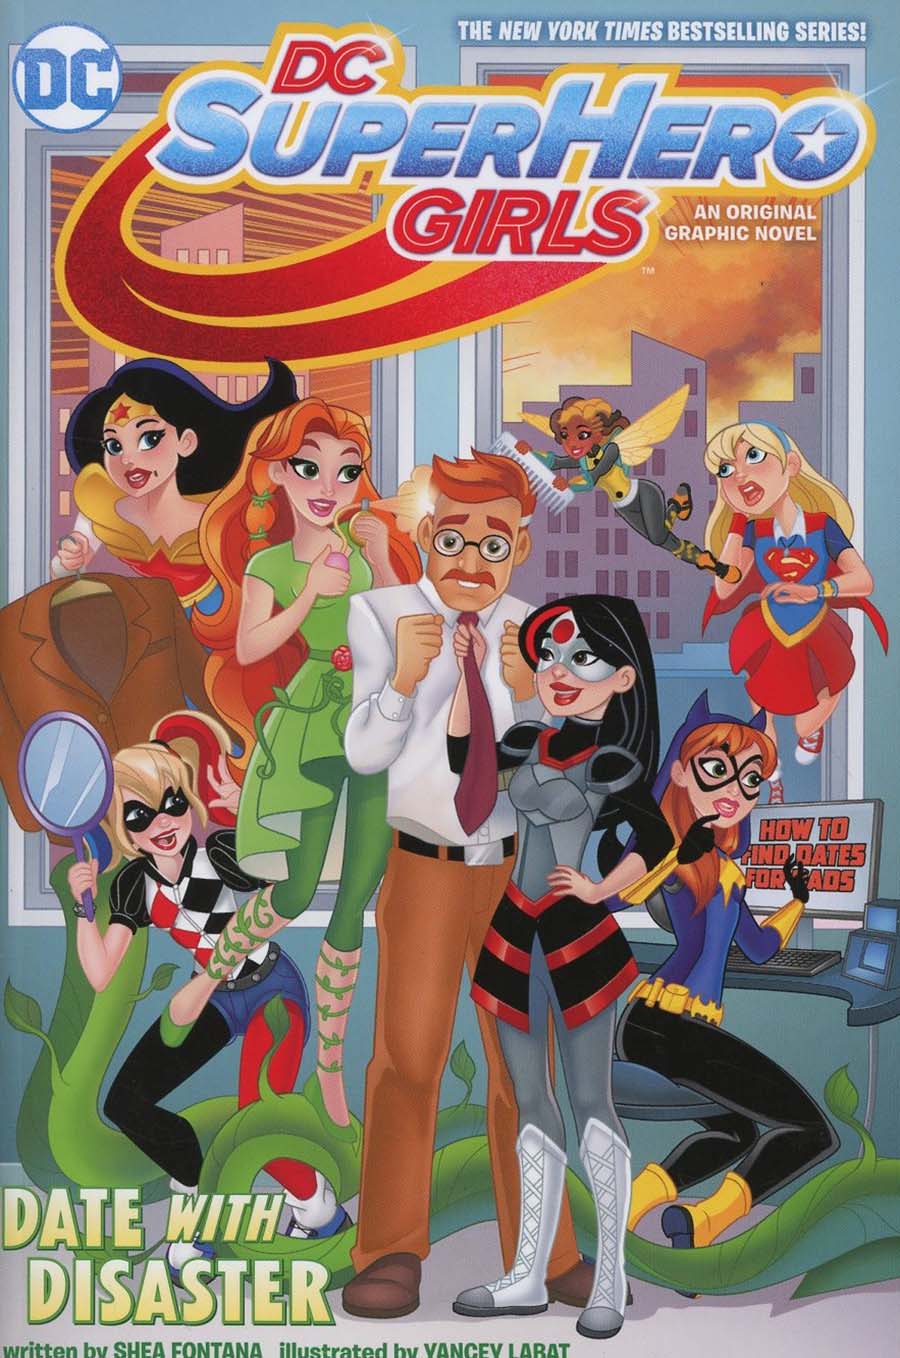 DC Super Hero Girls Vol 5 Date With Disaster TP